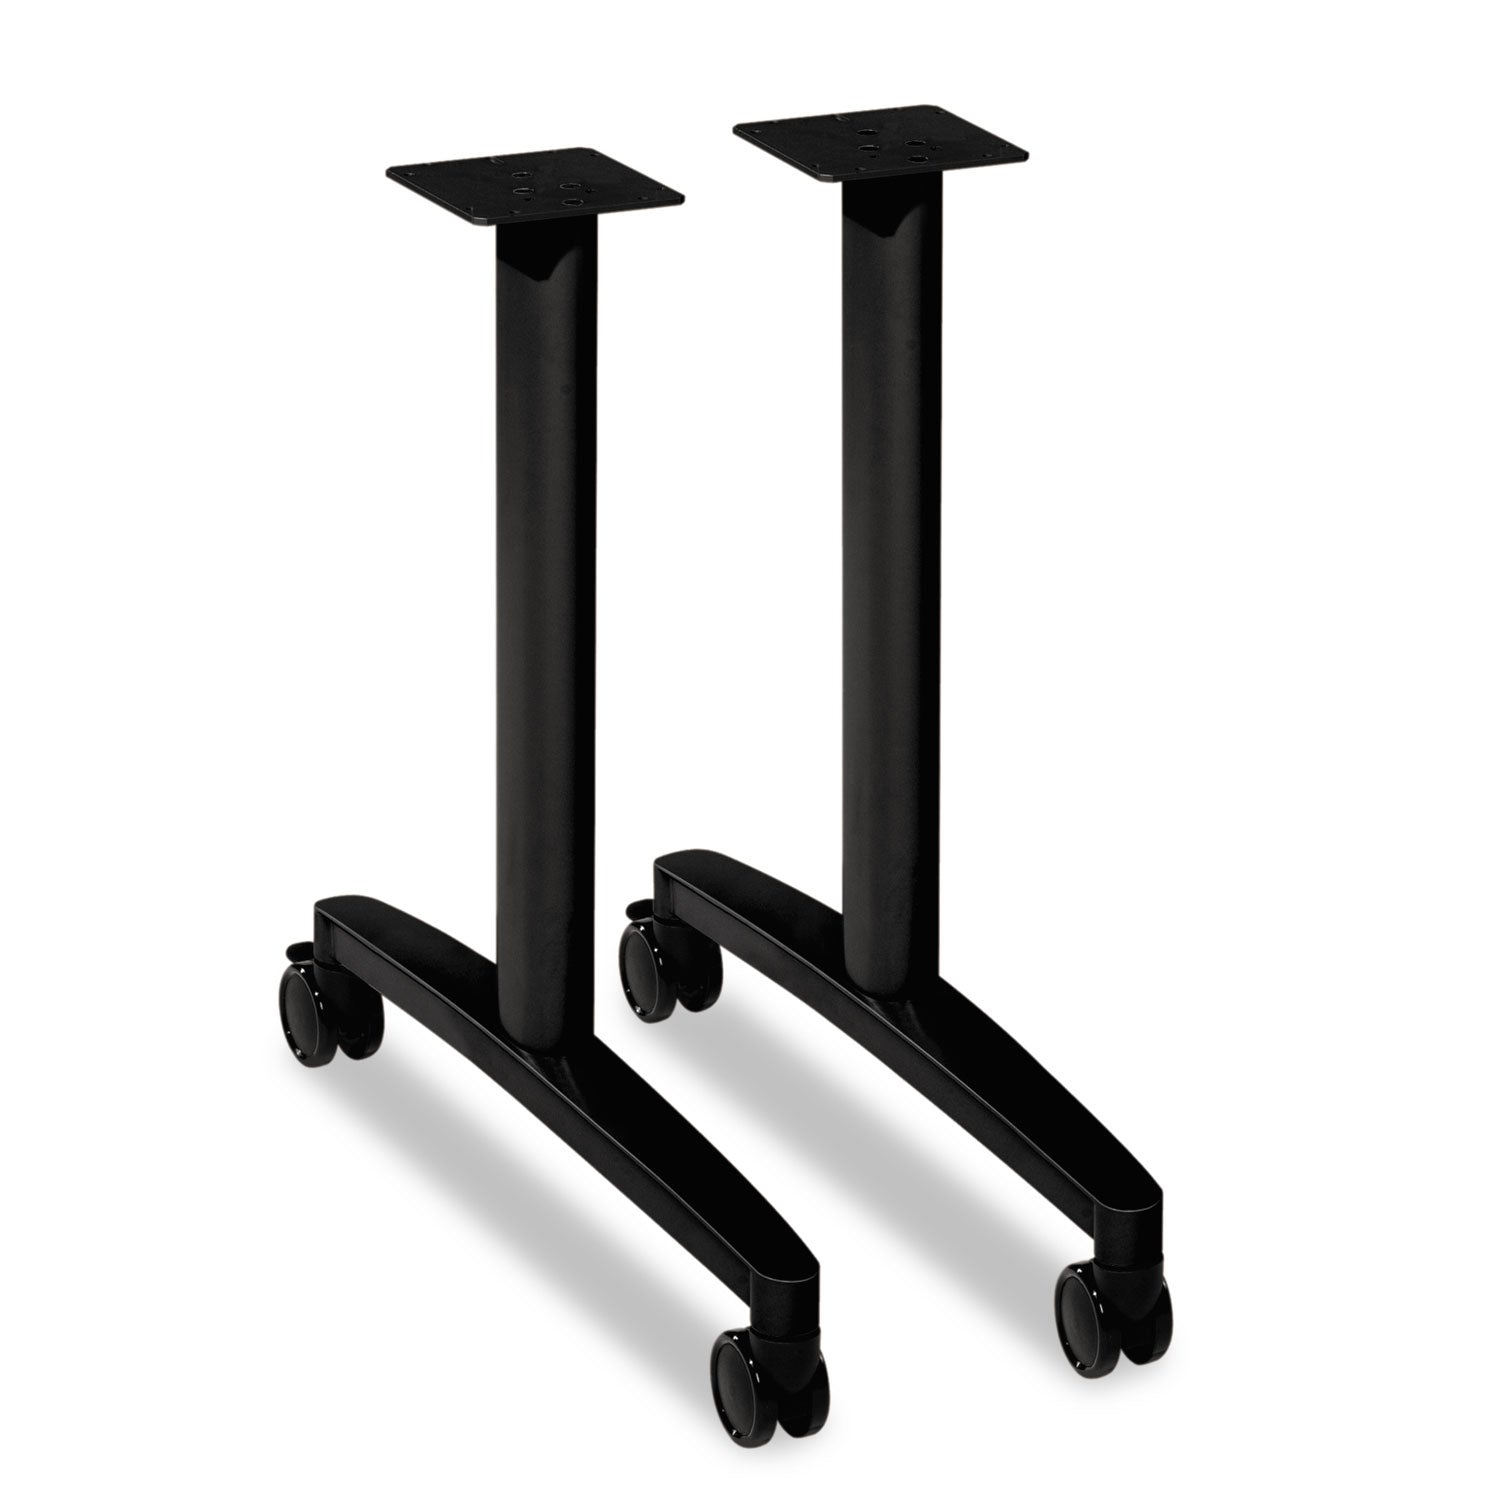 Huddle T-Leg Base for 24" and 30" Deep Table Tops, 39.25w x 23.5d x 23.38h, Black - 